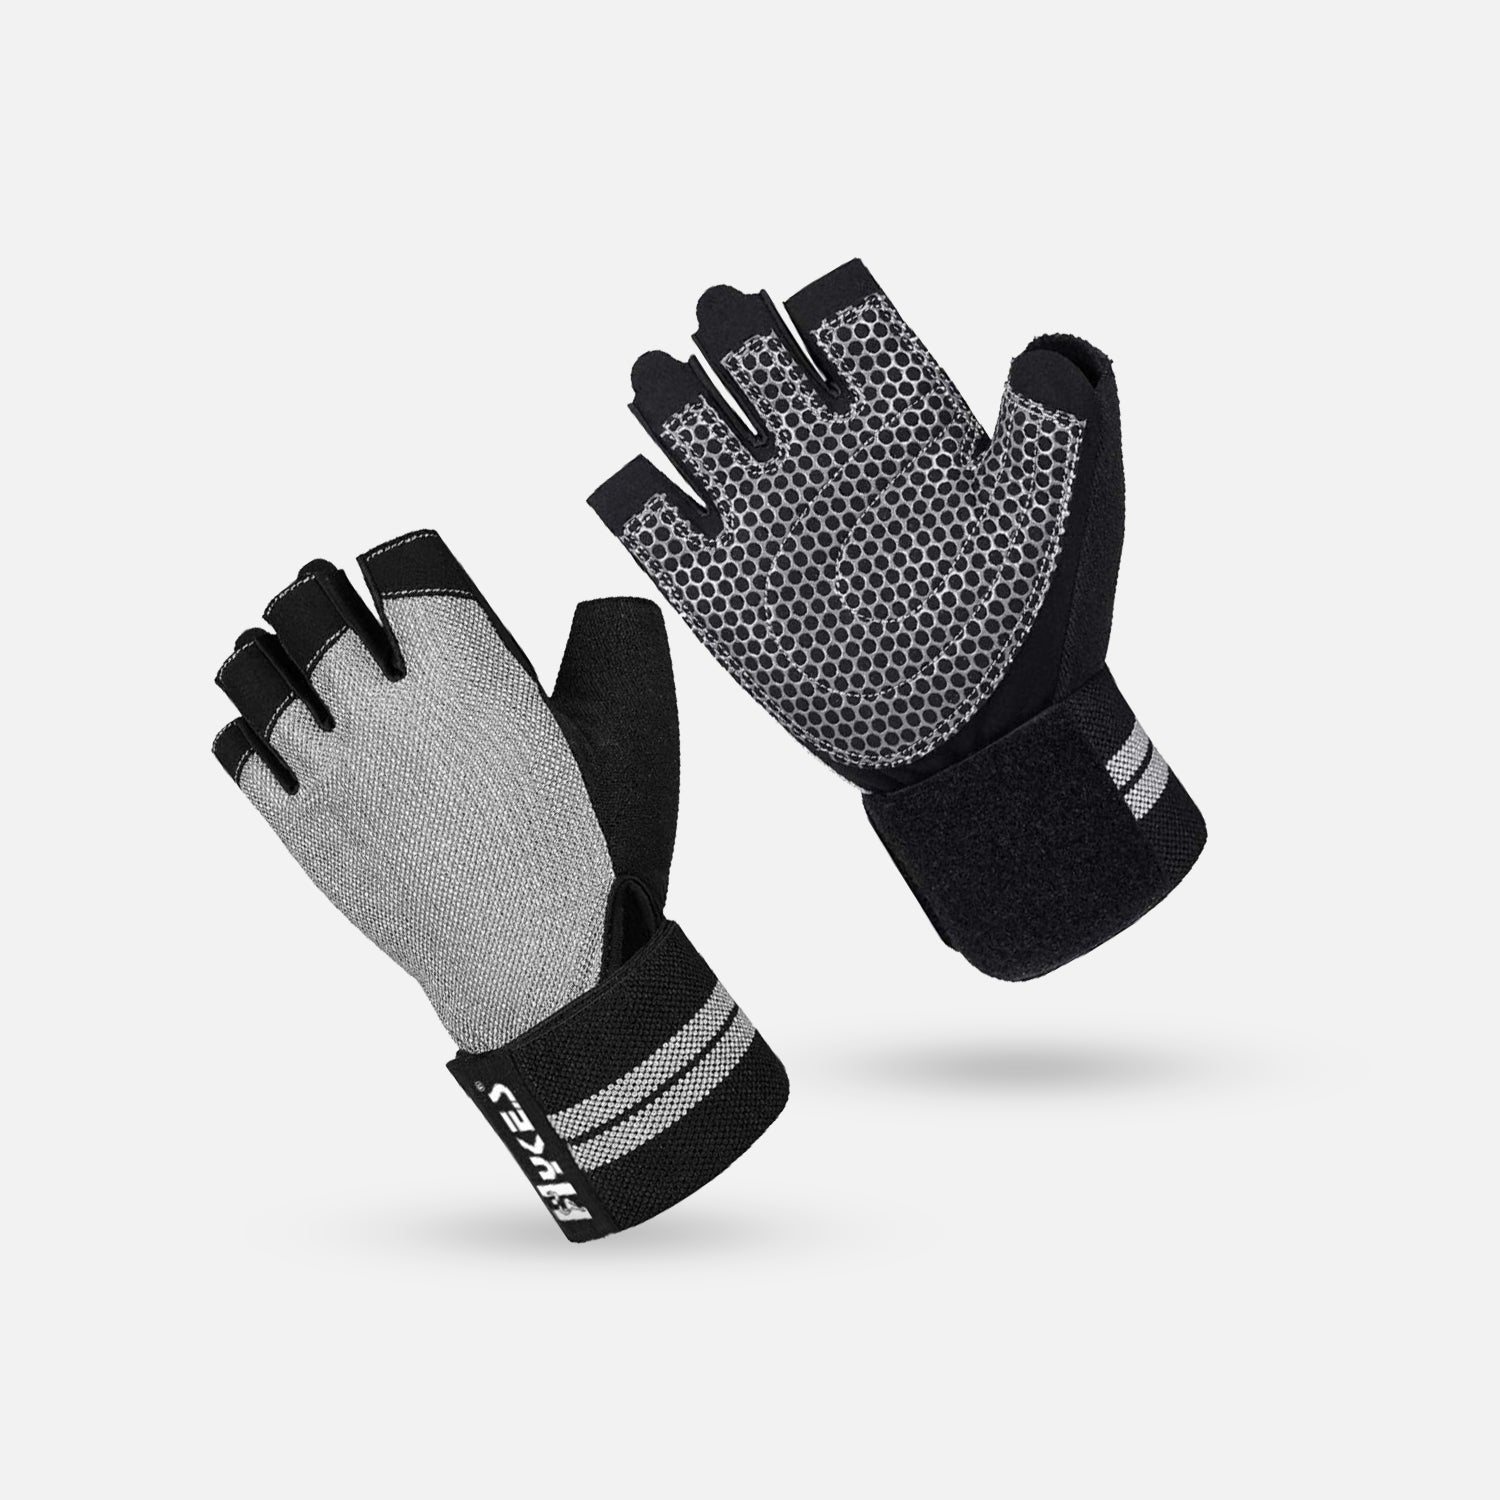 Get Gym Workout Gloves & Best Lifting Gloves with Wrist Support